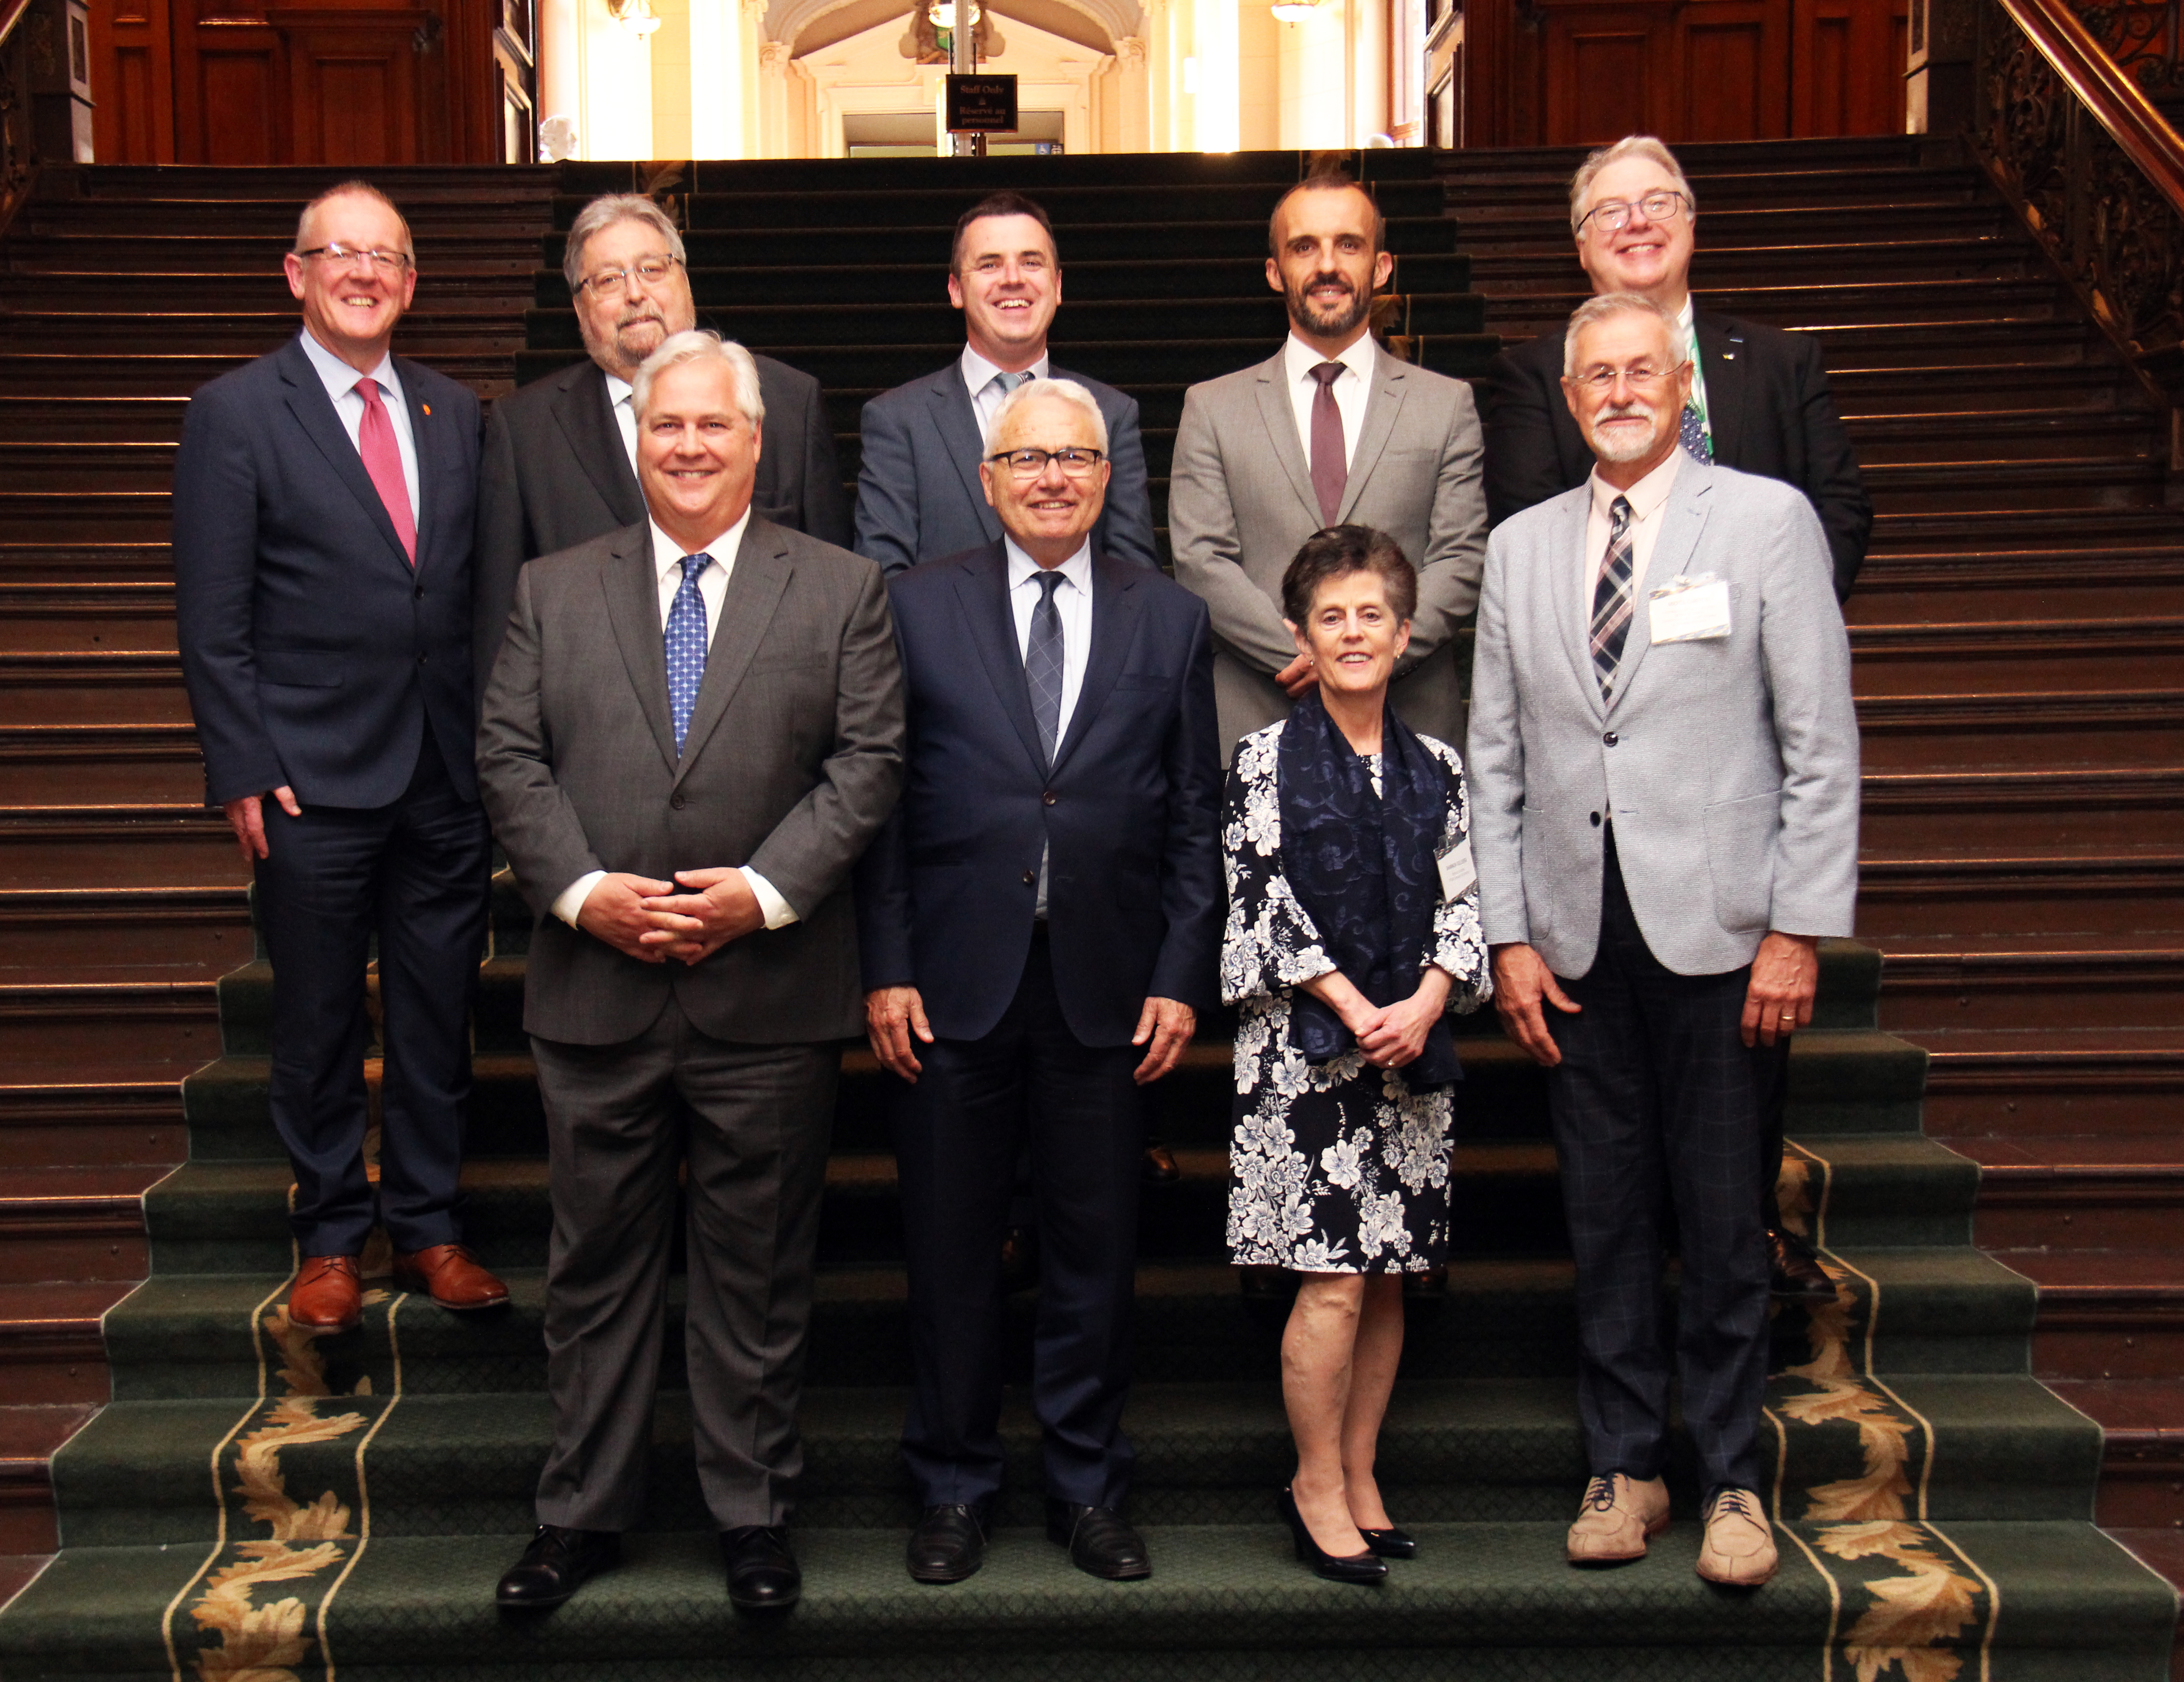 Ombudsman Paul Dubé and fellow members of the International Association of Language Commissioners, at Queen's Park.